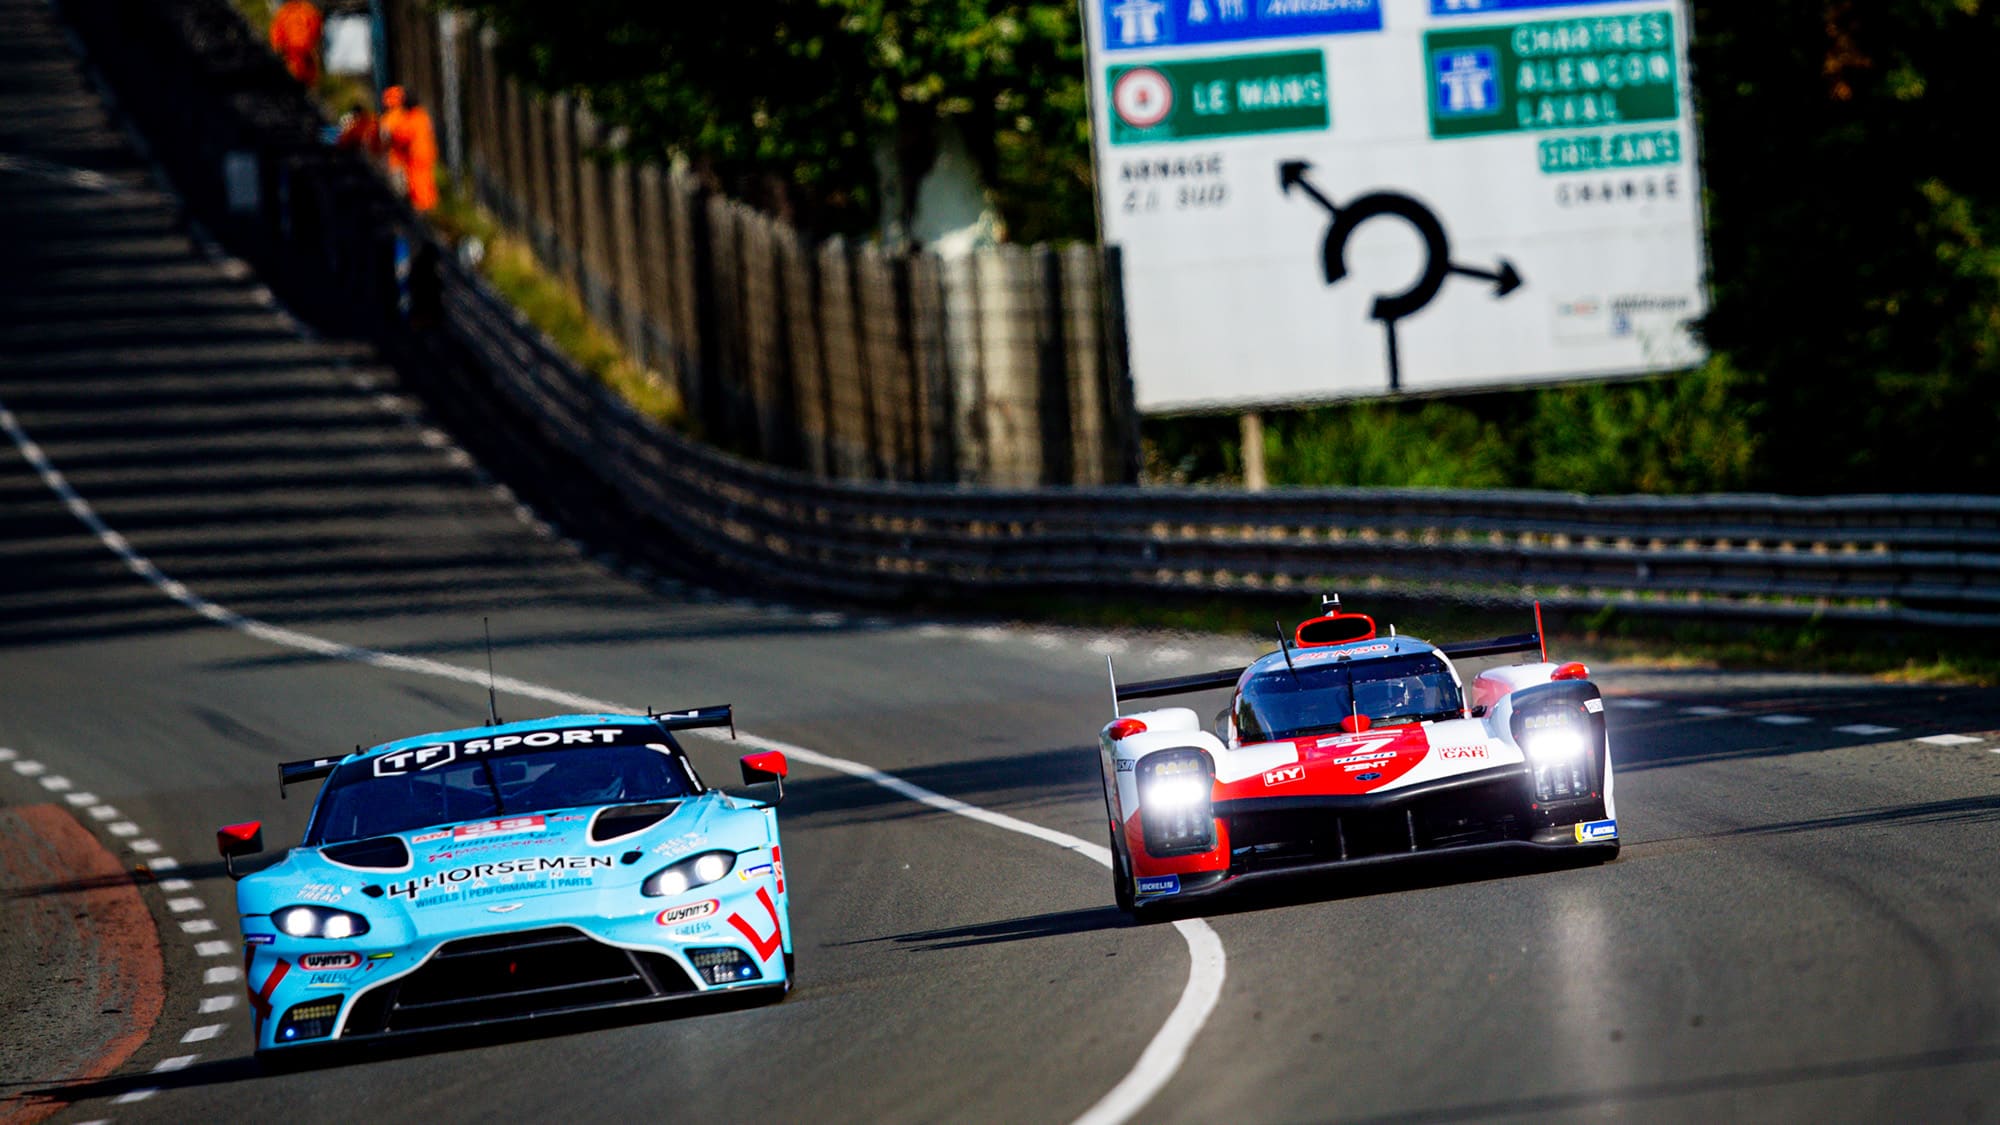 How to watch the 2021 Le Mans 24 Hours live streaming and TV details